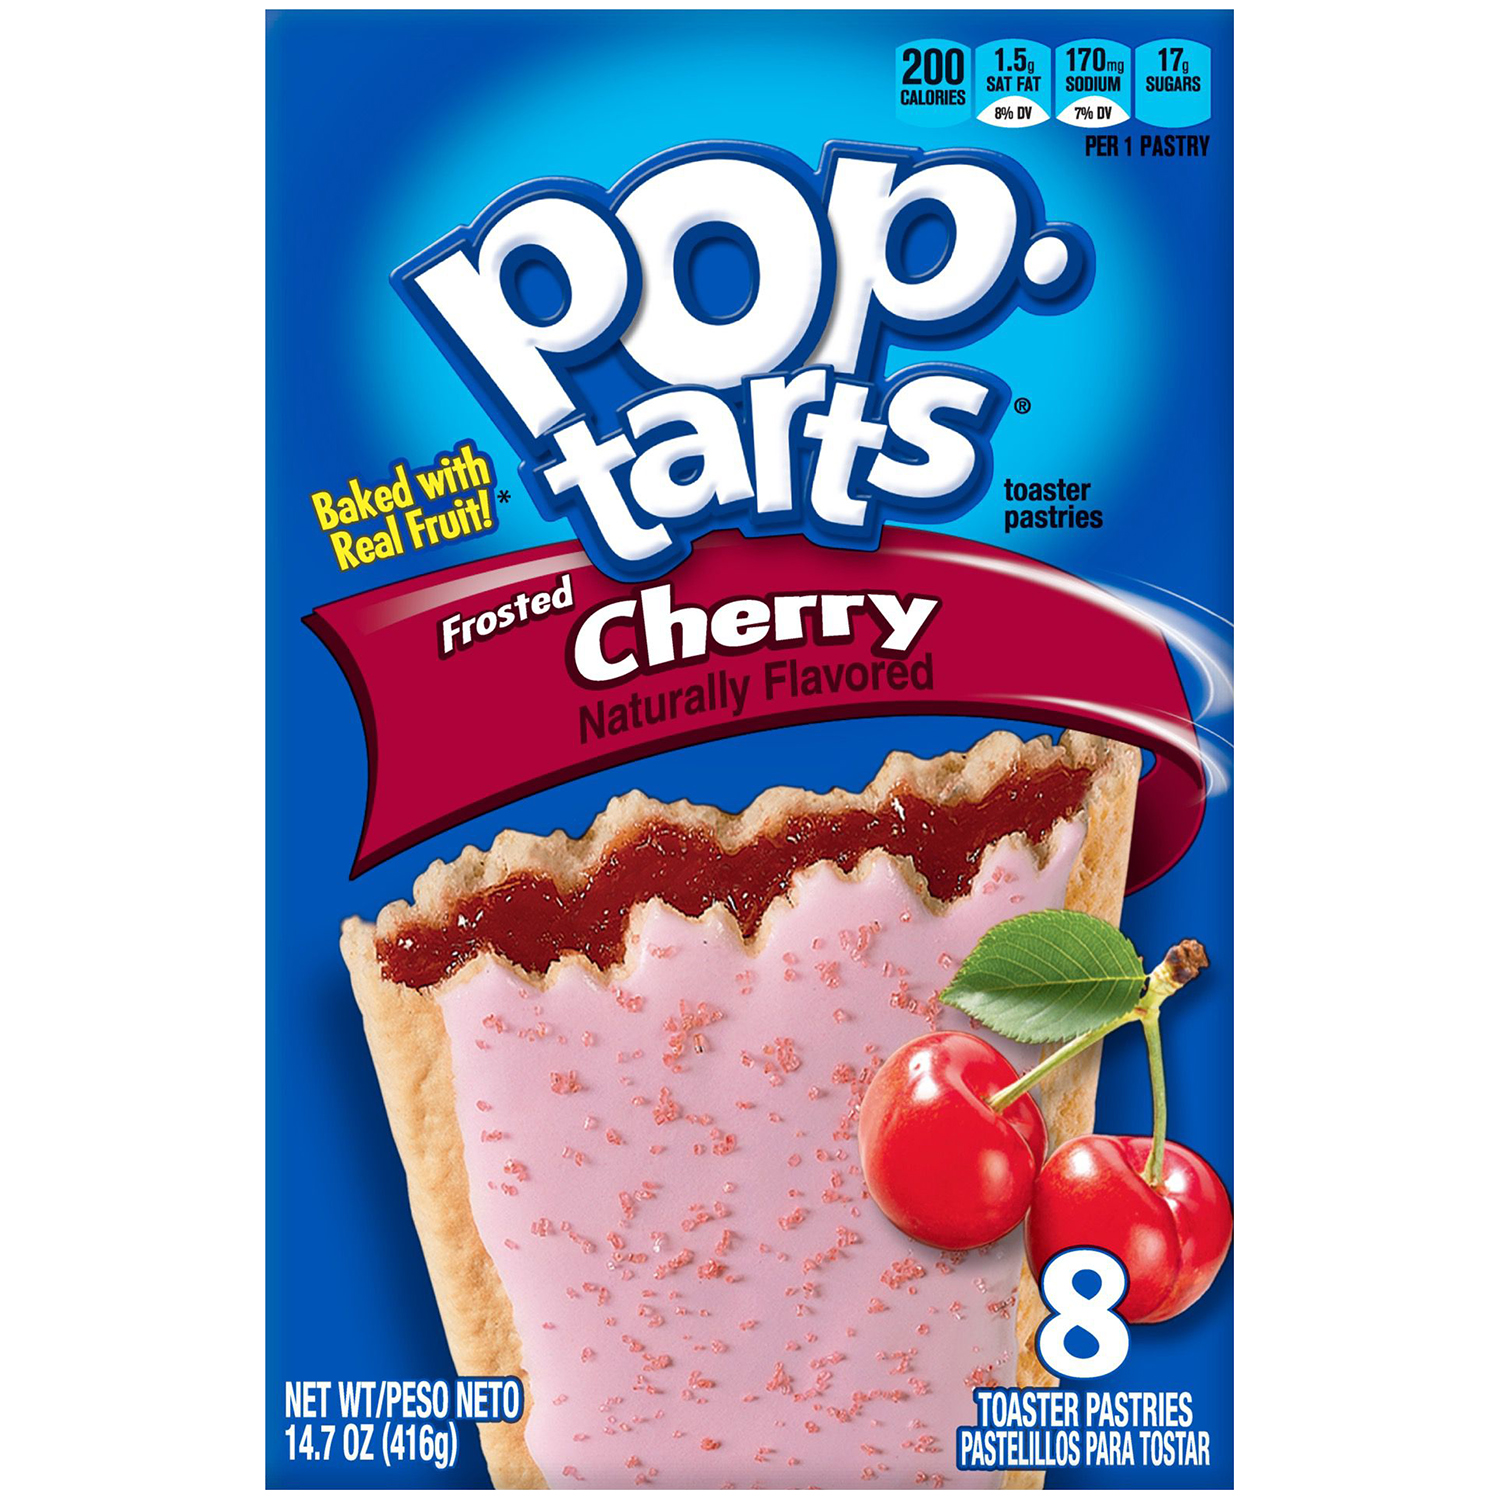 Kellogg's Pop-Tarts Frosted Cherry Flavor Food Product Image